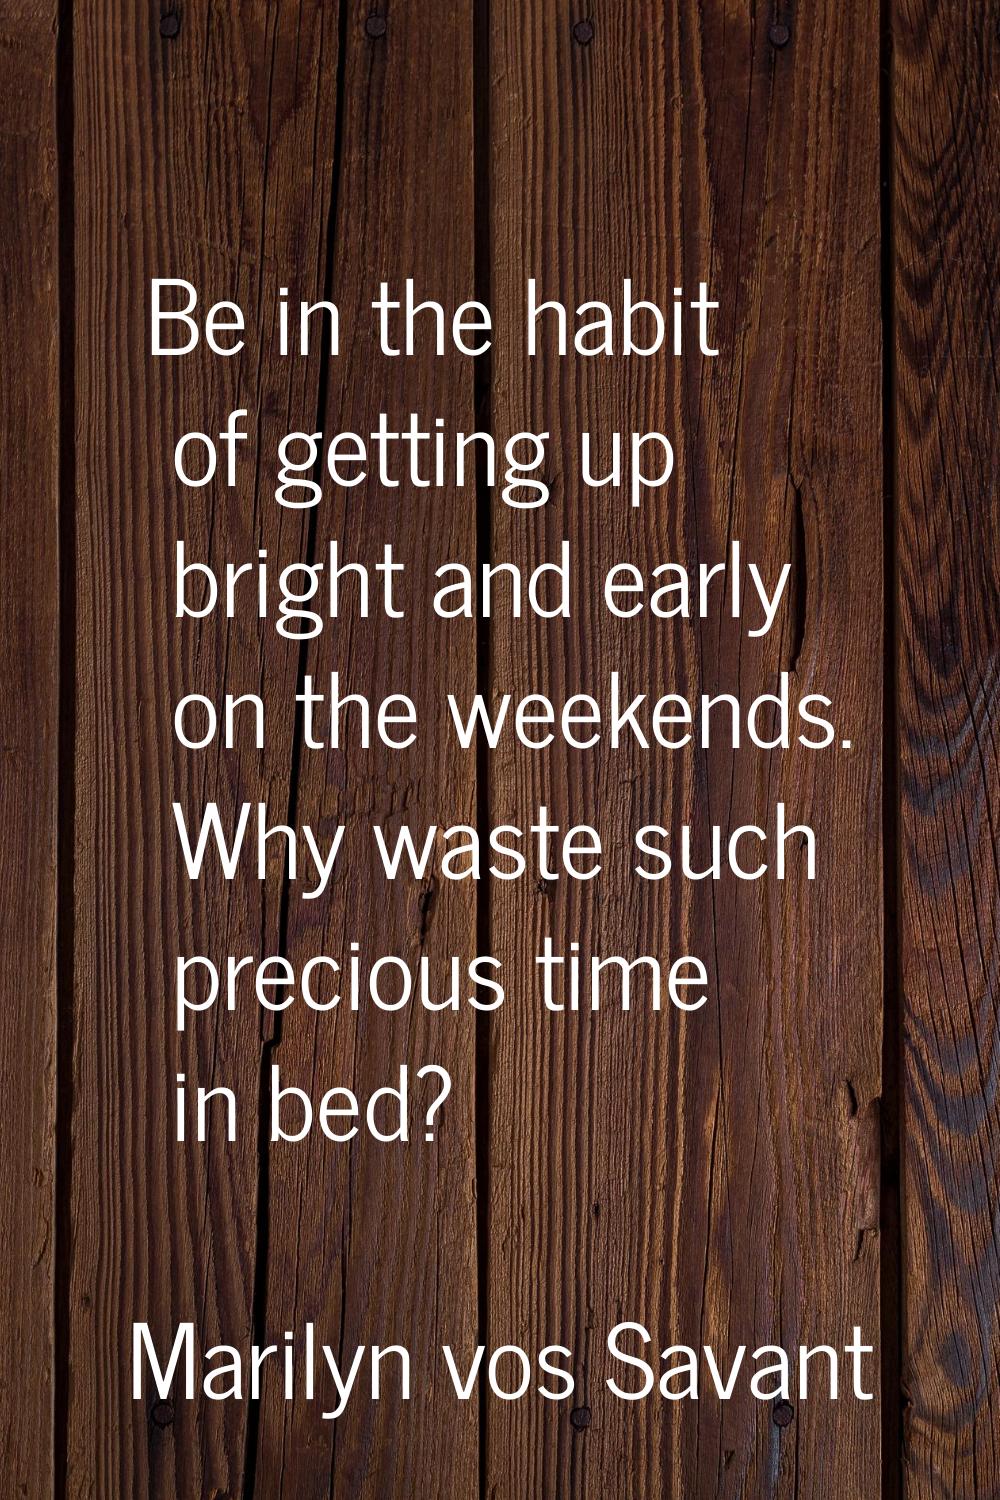 Be in the habit of getting up bright and early on the weekends. Why waste such precious time in bed